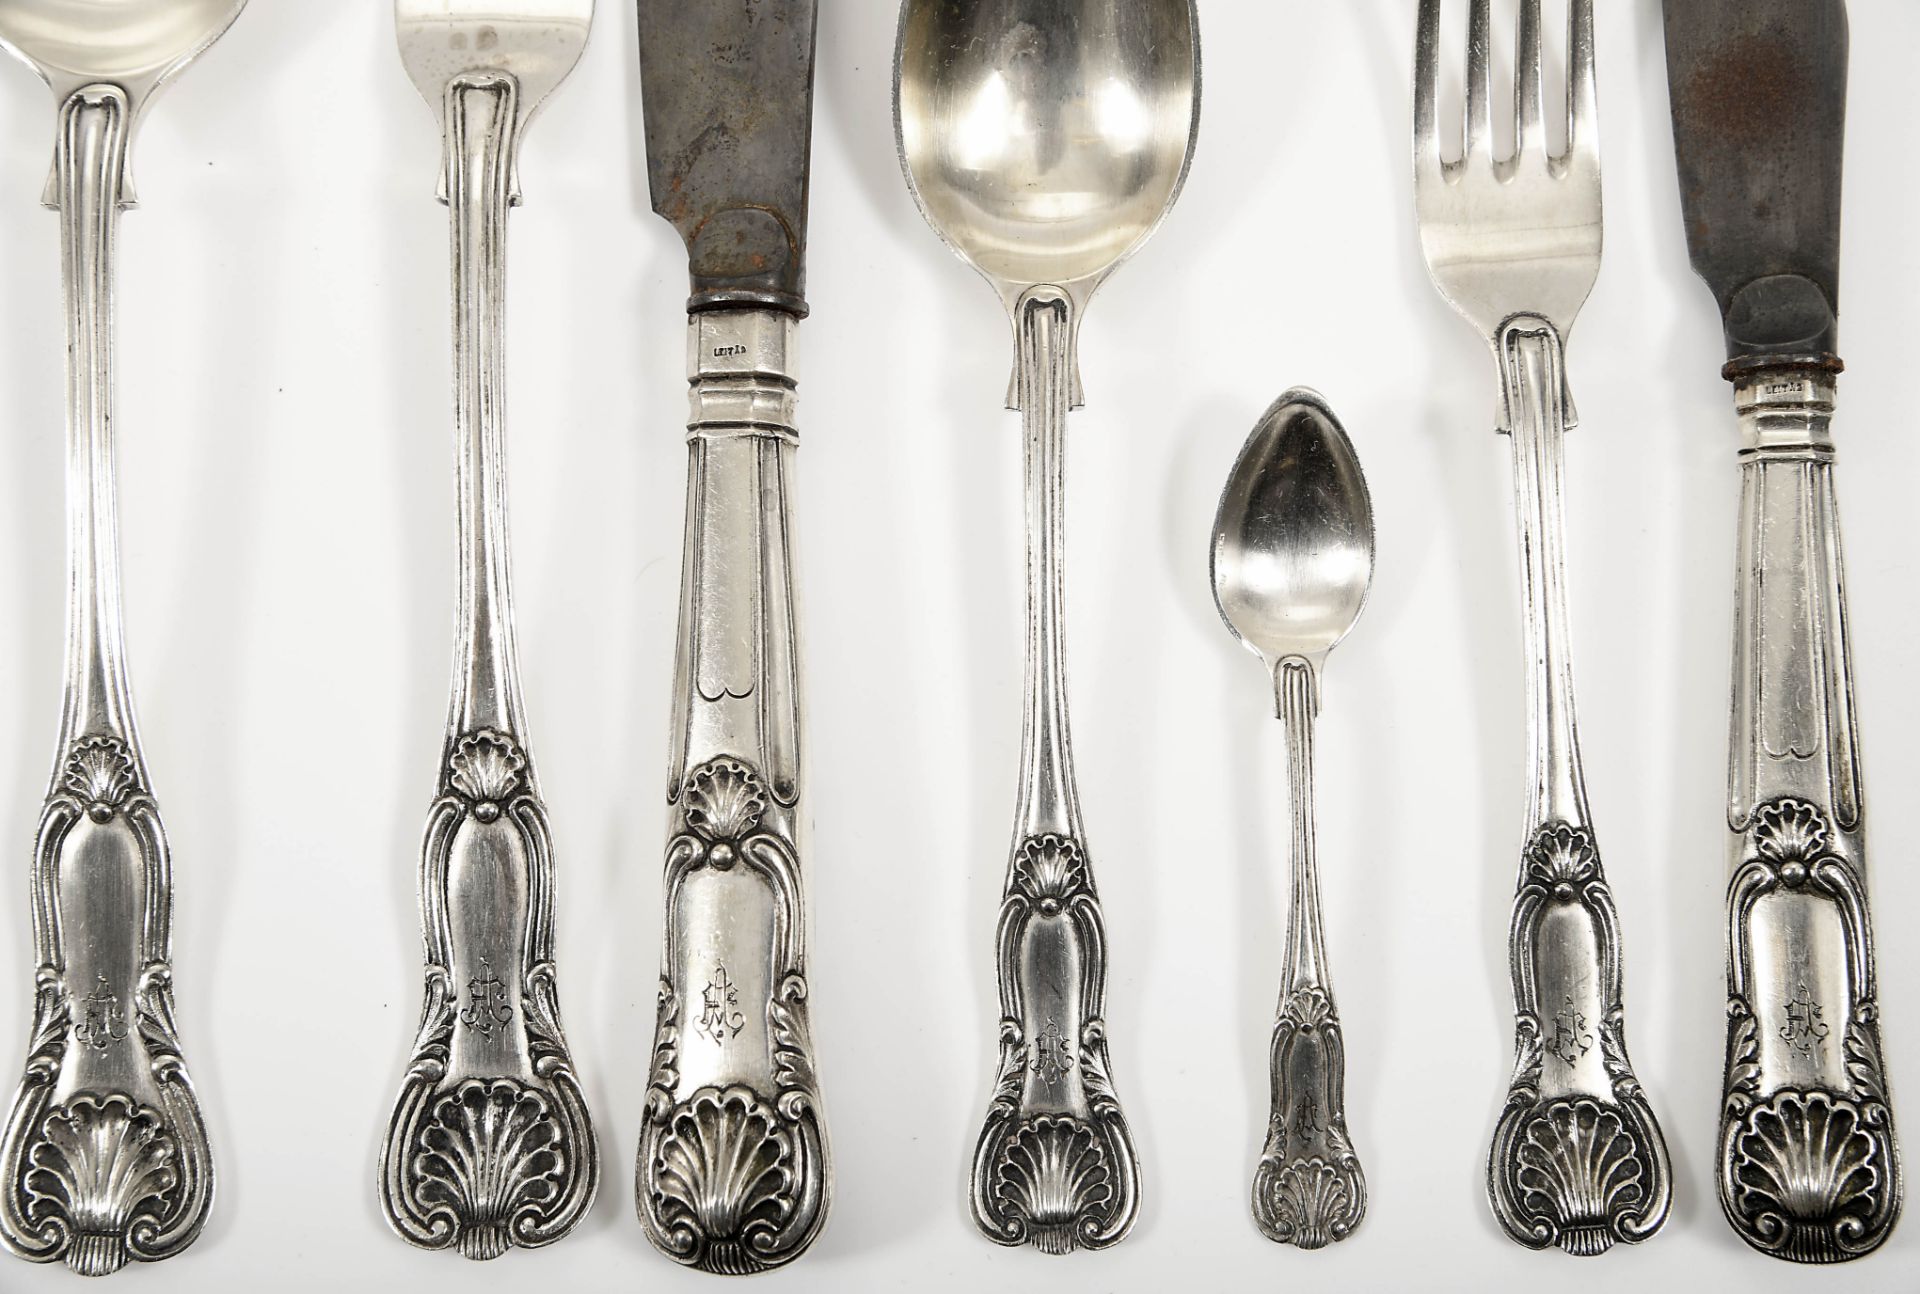 Flatware for 24 people - Image 6 of 6